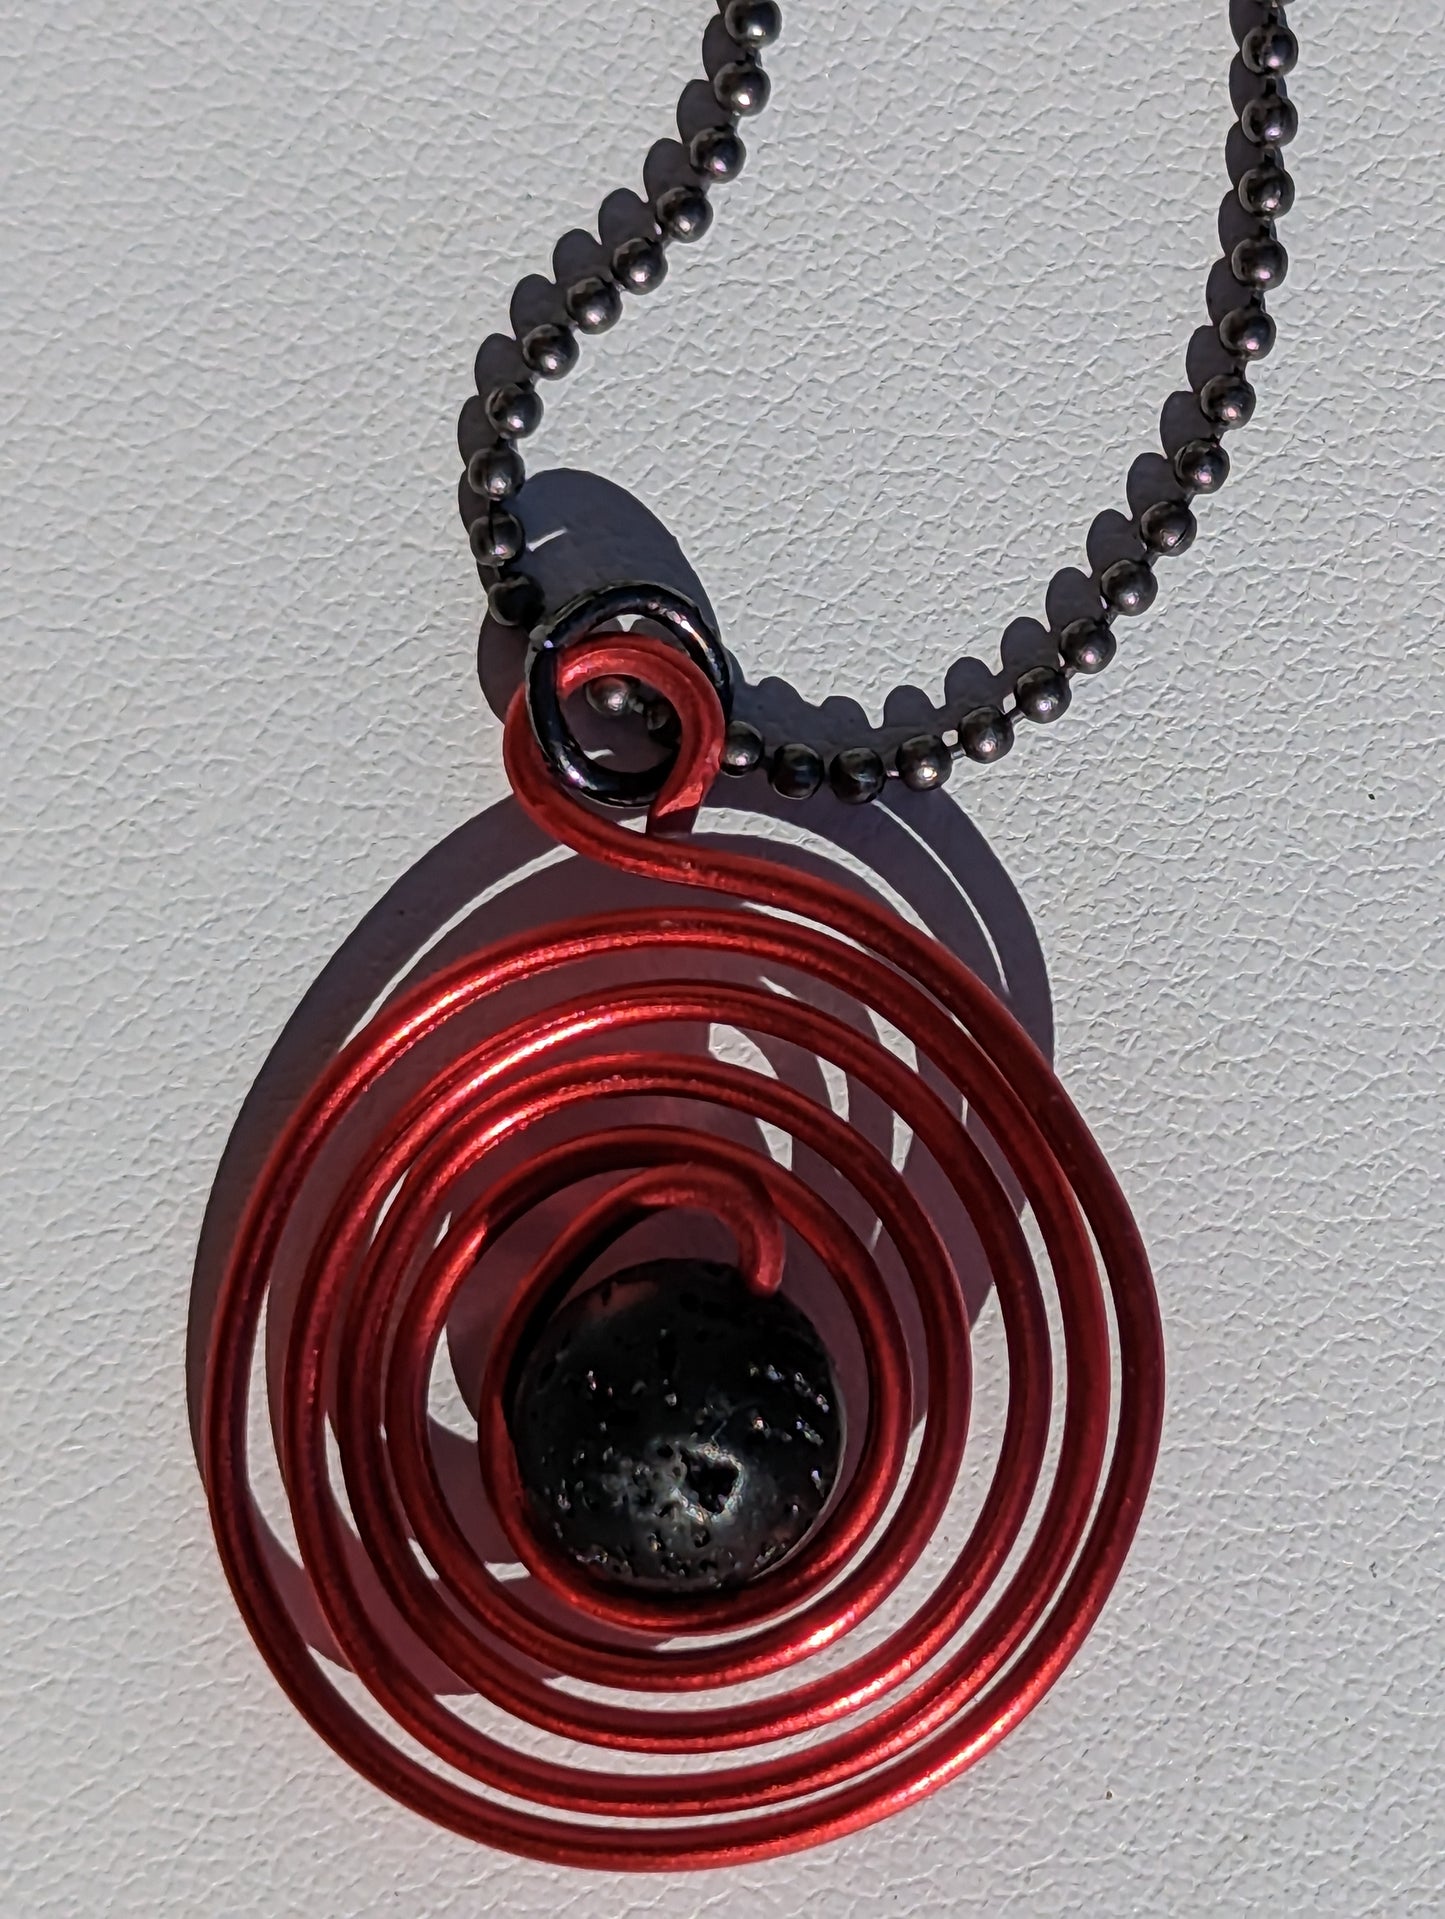 Wire Wrapped Lava Bead Hanger (or Keychain) - Large Red